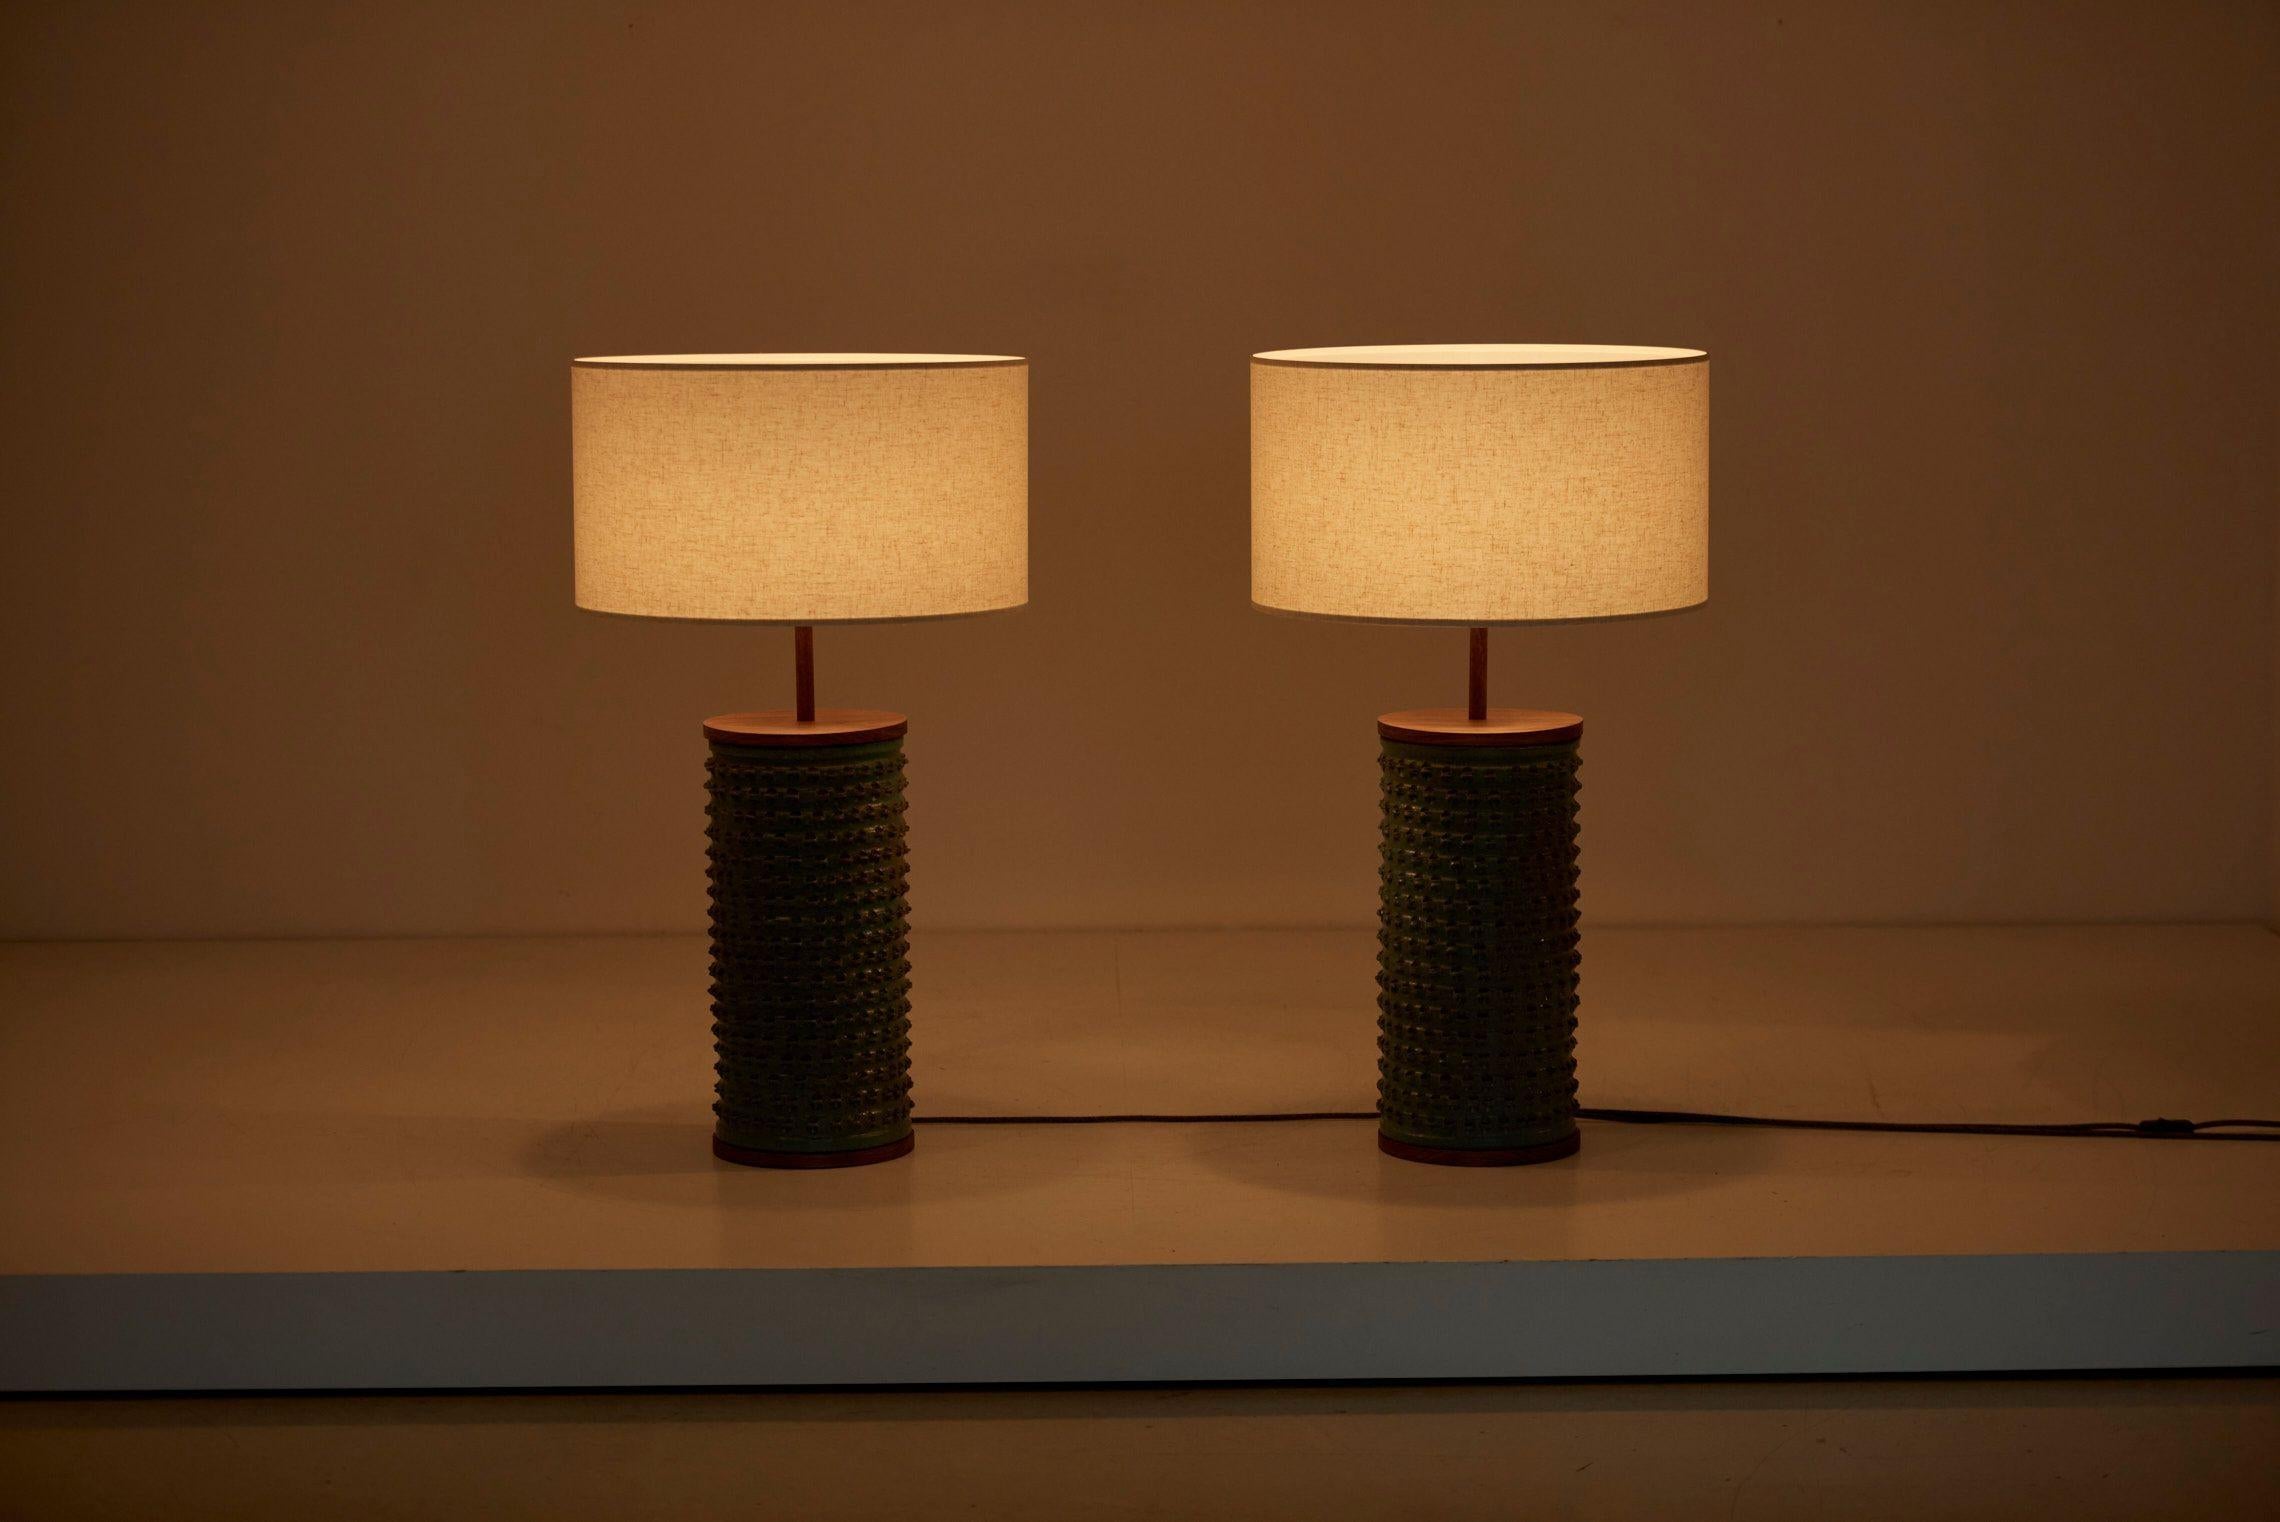 American Pair of Brent Bennet Ceramic Table Lamps, USA, 2021